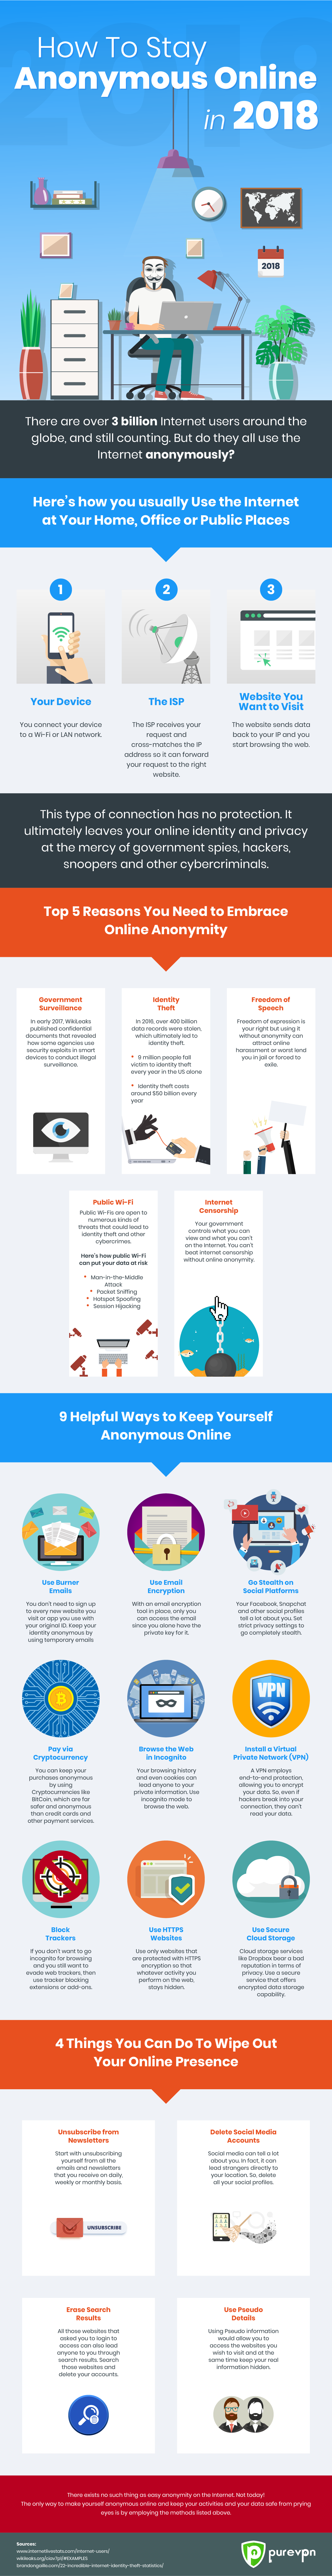 How to Stay Anonymous Online in 2018 #infographic 